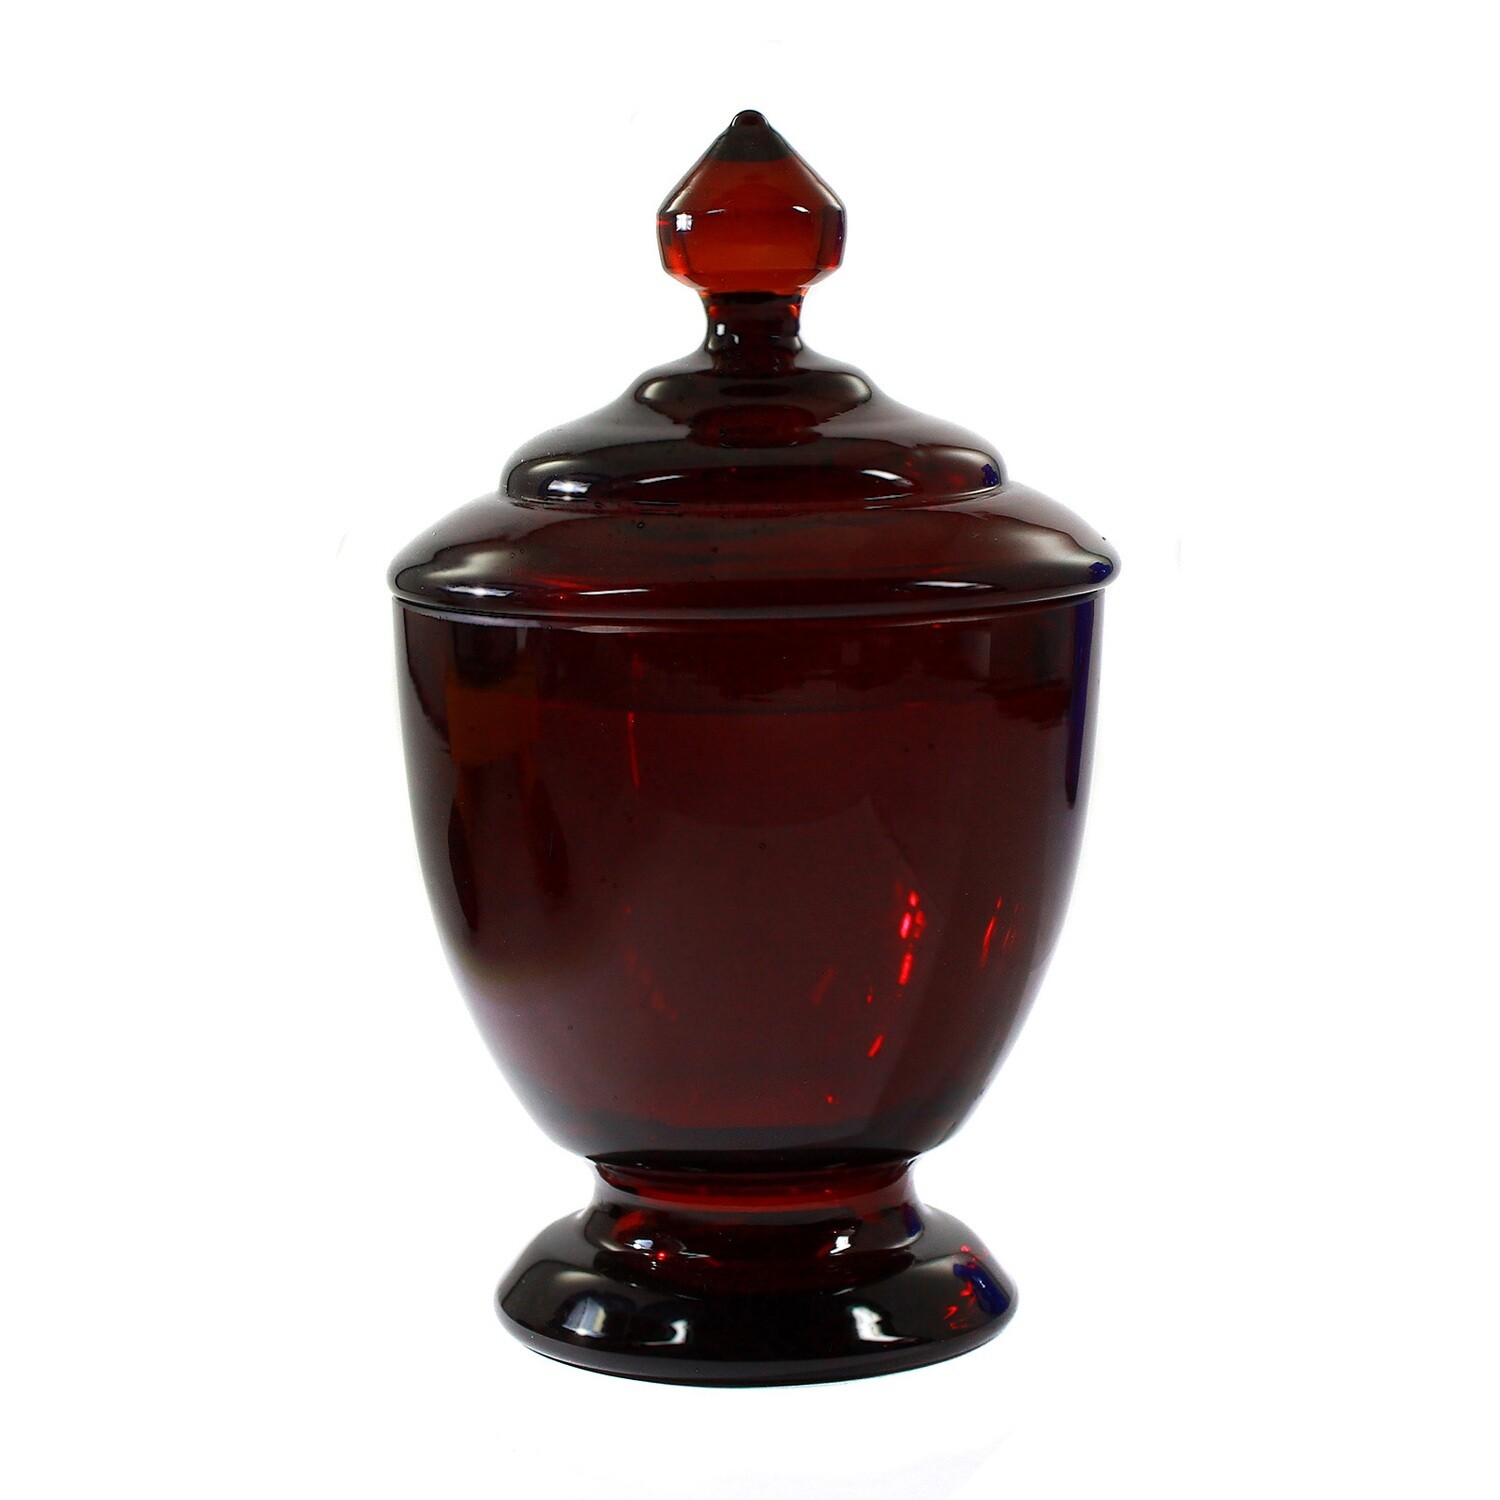 Lidded box made of colorless glass with a ruby red base, signed. Jean Beck